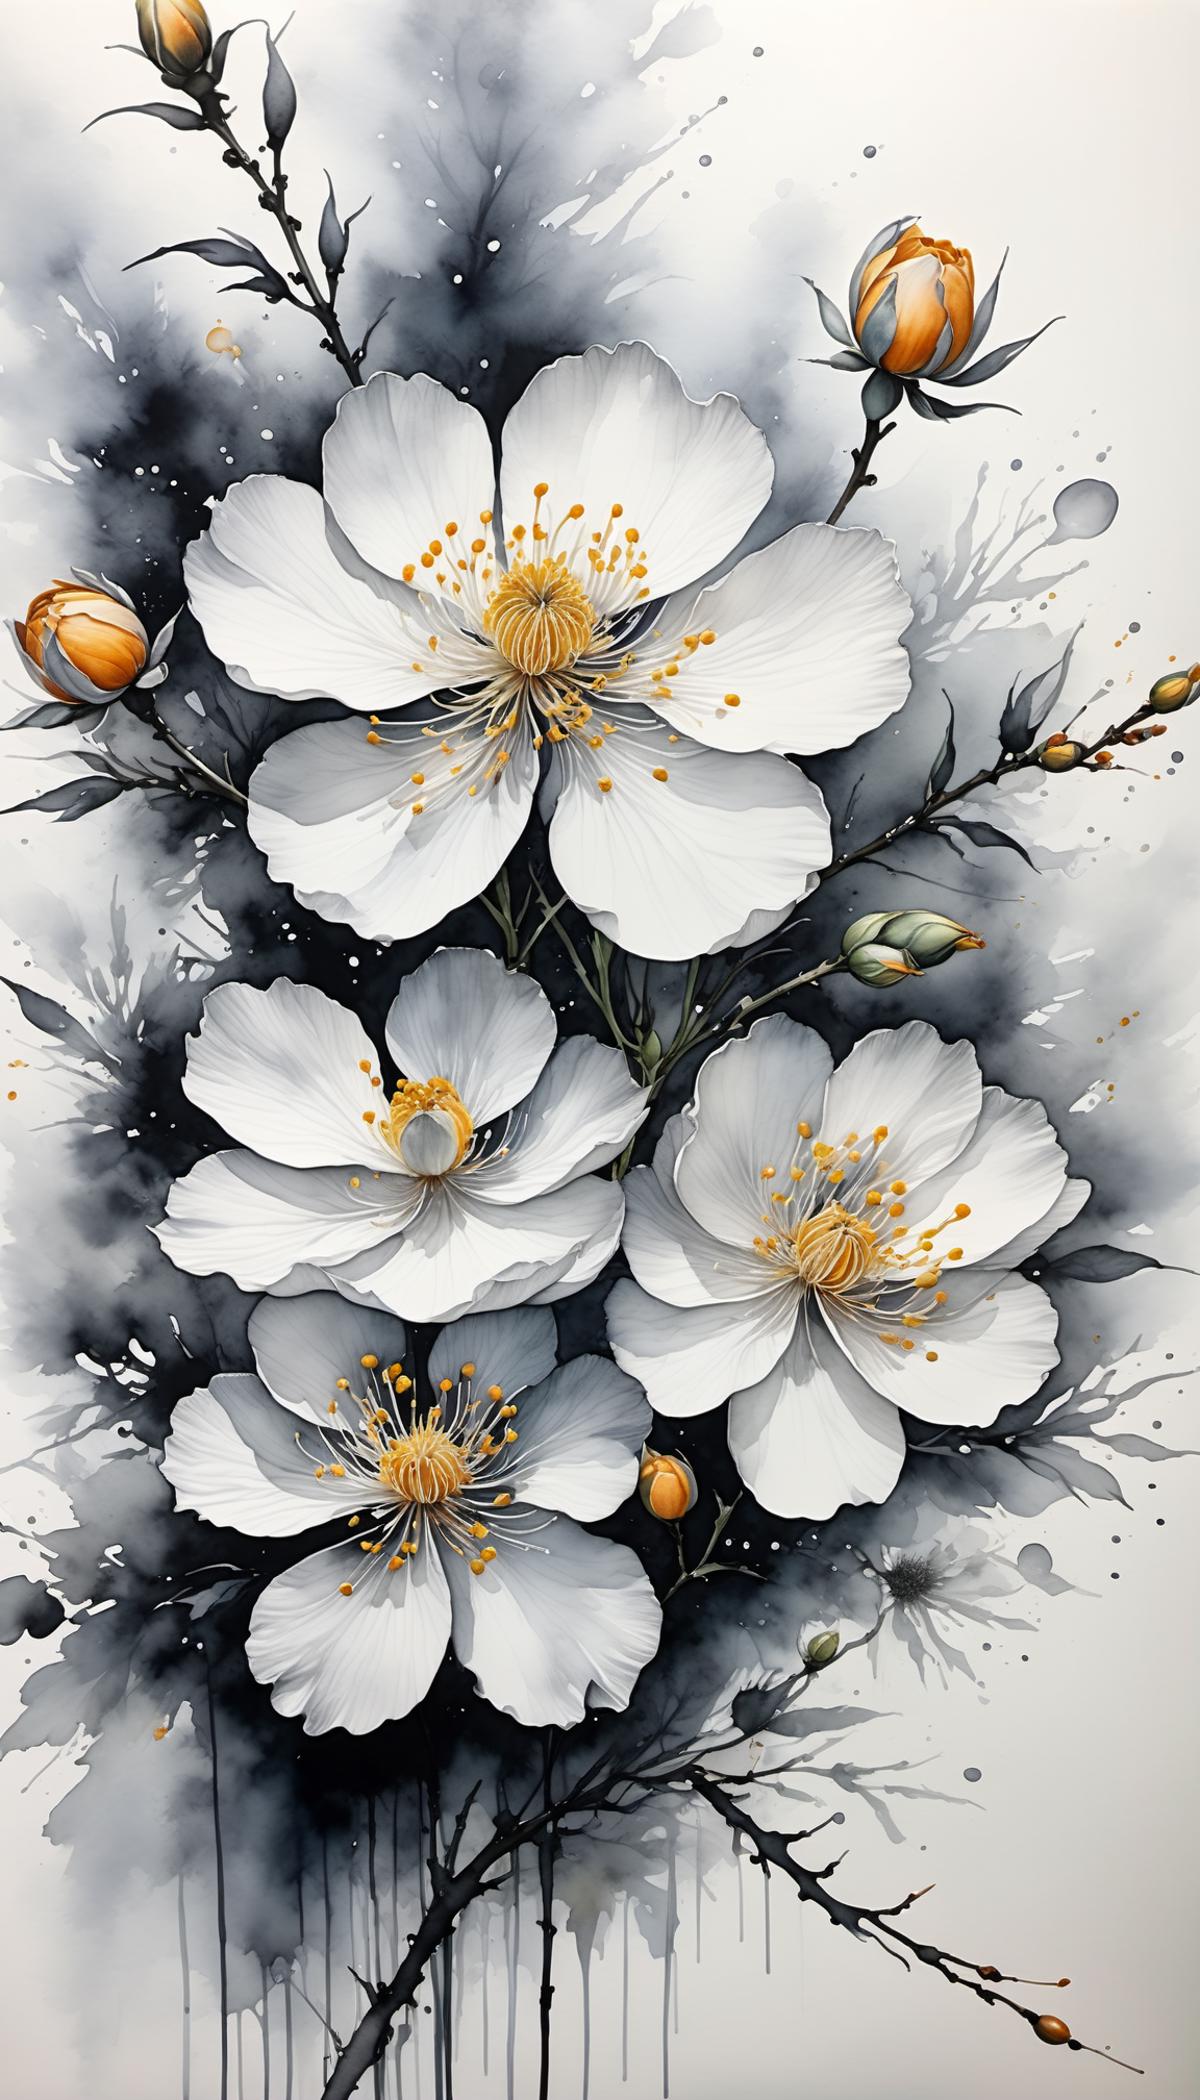 A Black and White Painting of White Flowers with Yellow Centers